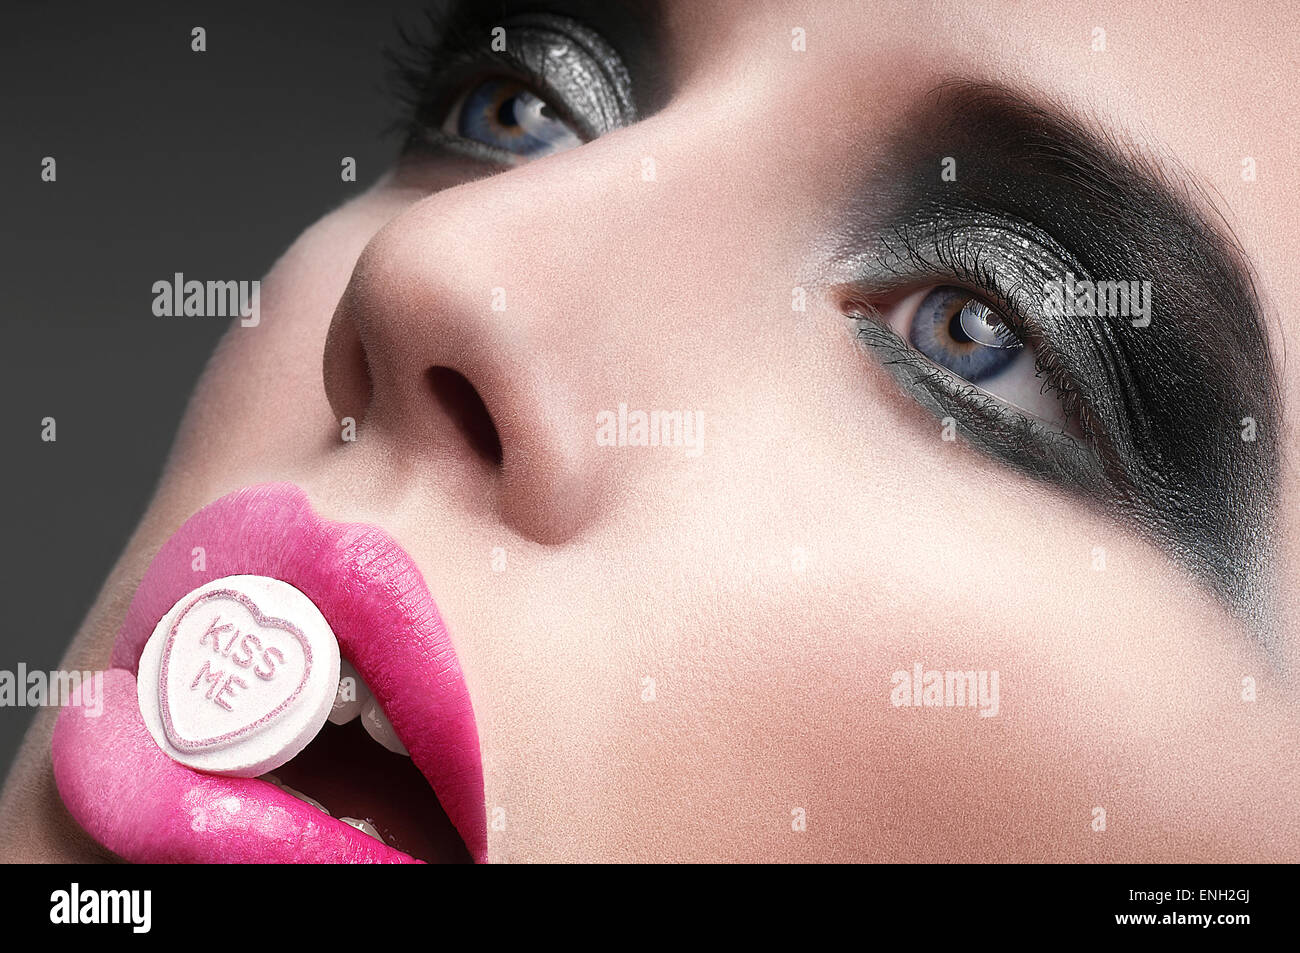 Kiss me sweet in mouth cropped beauty close-up Stock Photo